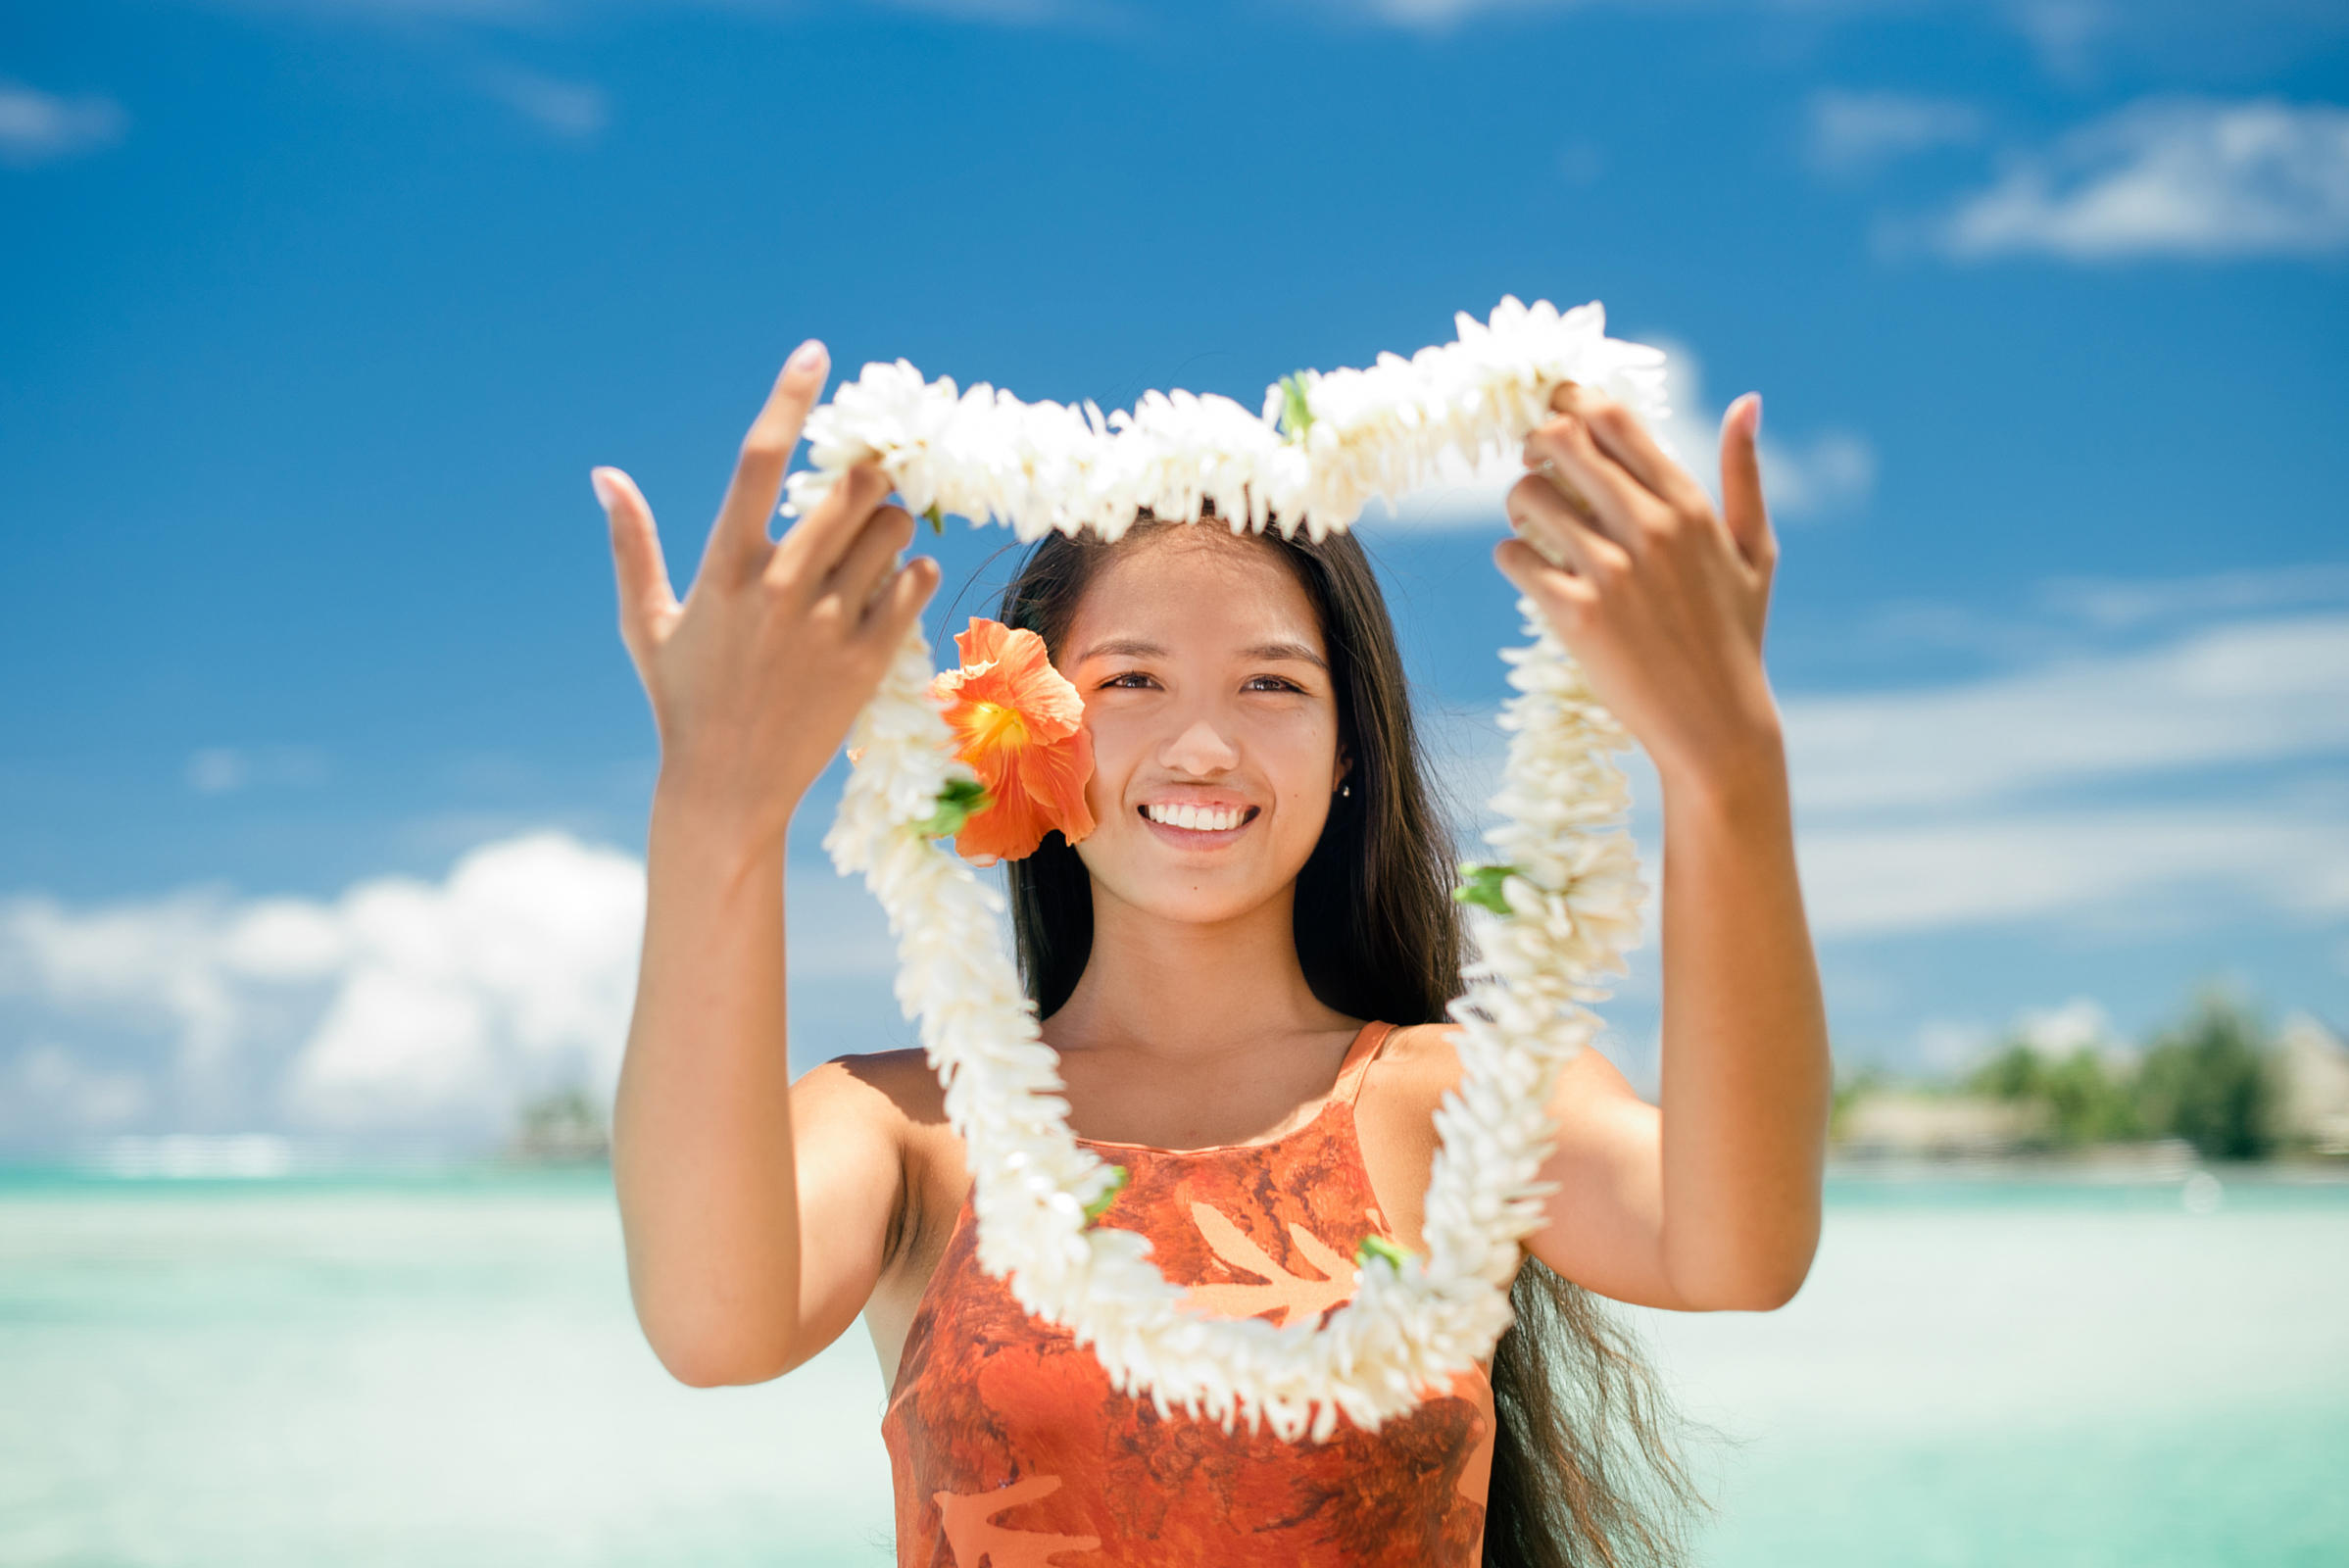 A Tahitian woman welcoming tourists while holding a big flower necklace